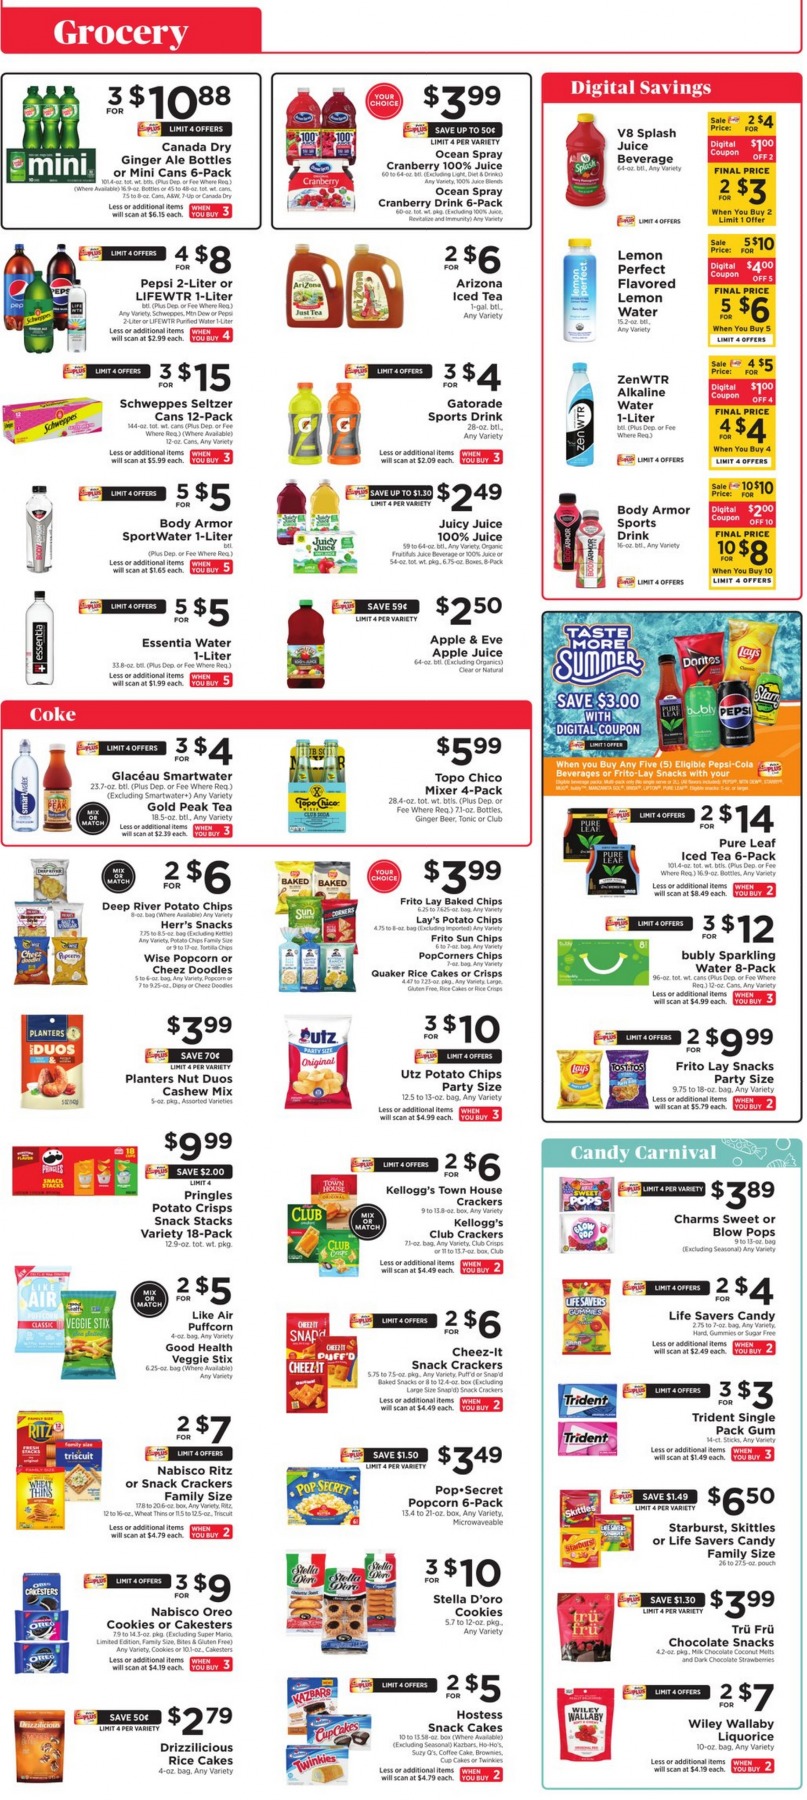 Shoprite Weekly Ad July 2024 Weekly Sales, Deals, Discounts and Digital Coupons.